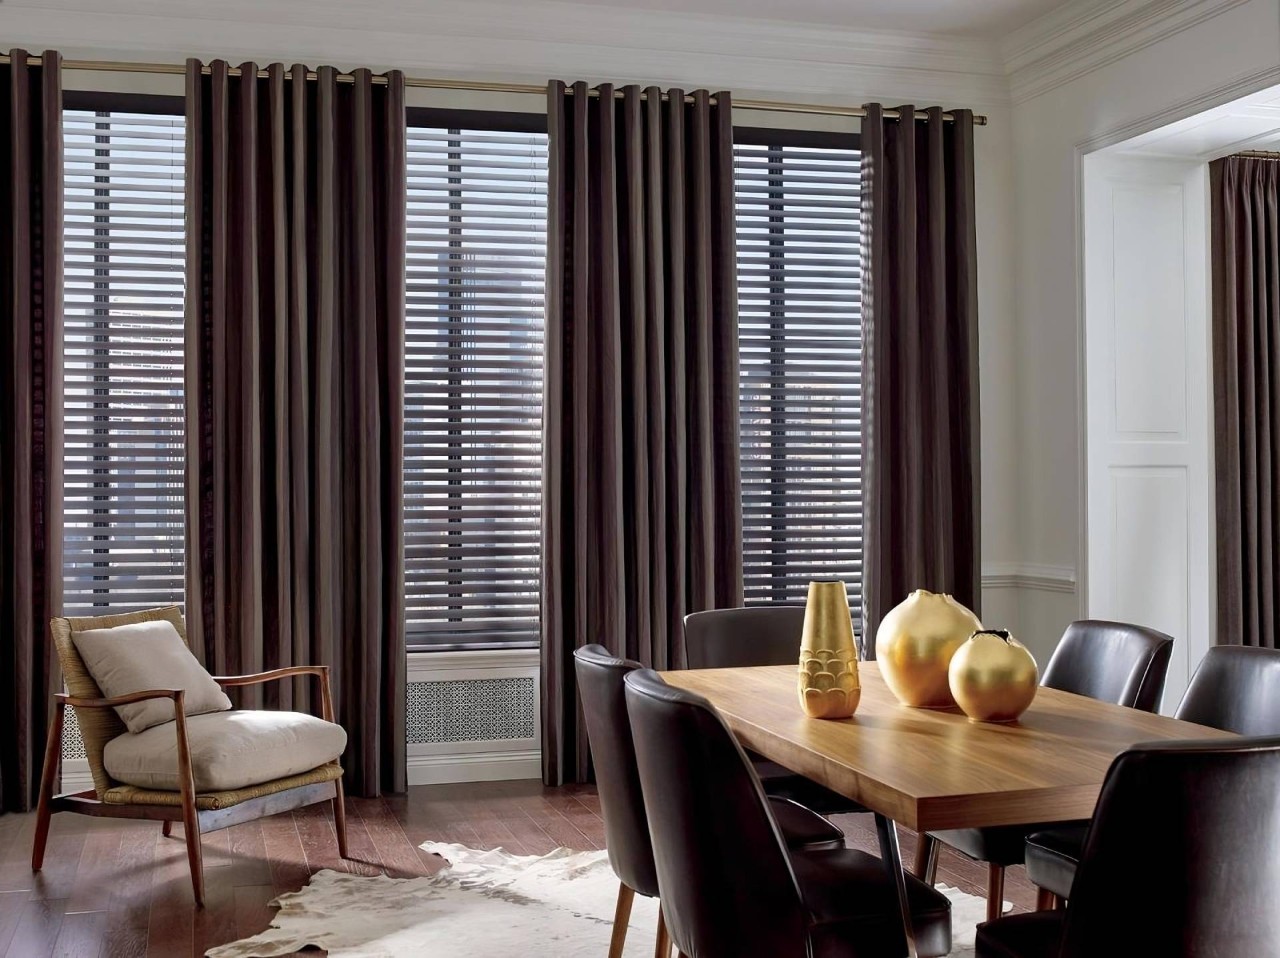 Apartment with large windows covered by Hunter Douglas metal blinds and dark-colored drapes near Boynton Beach, FL